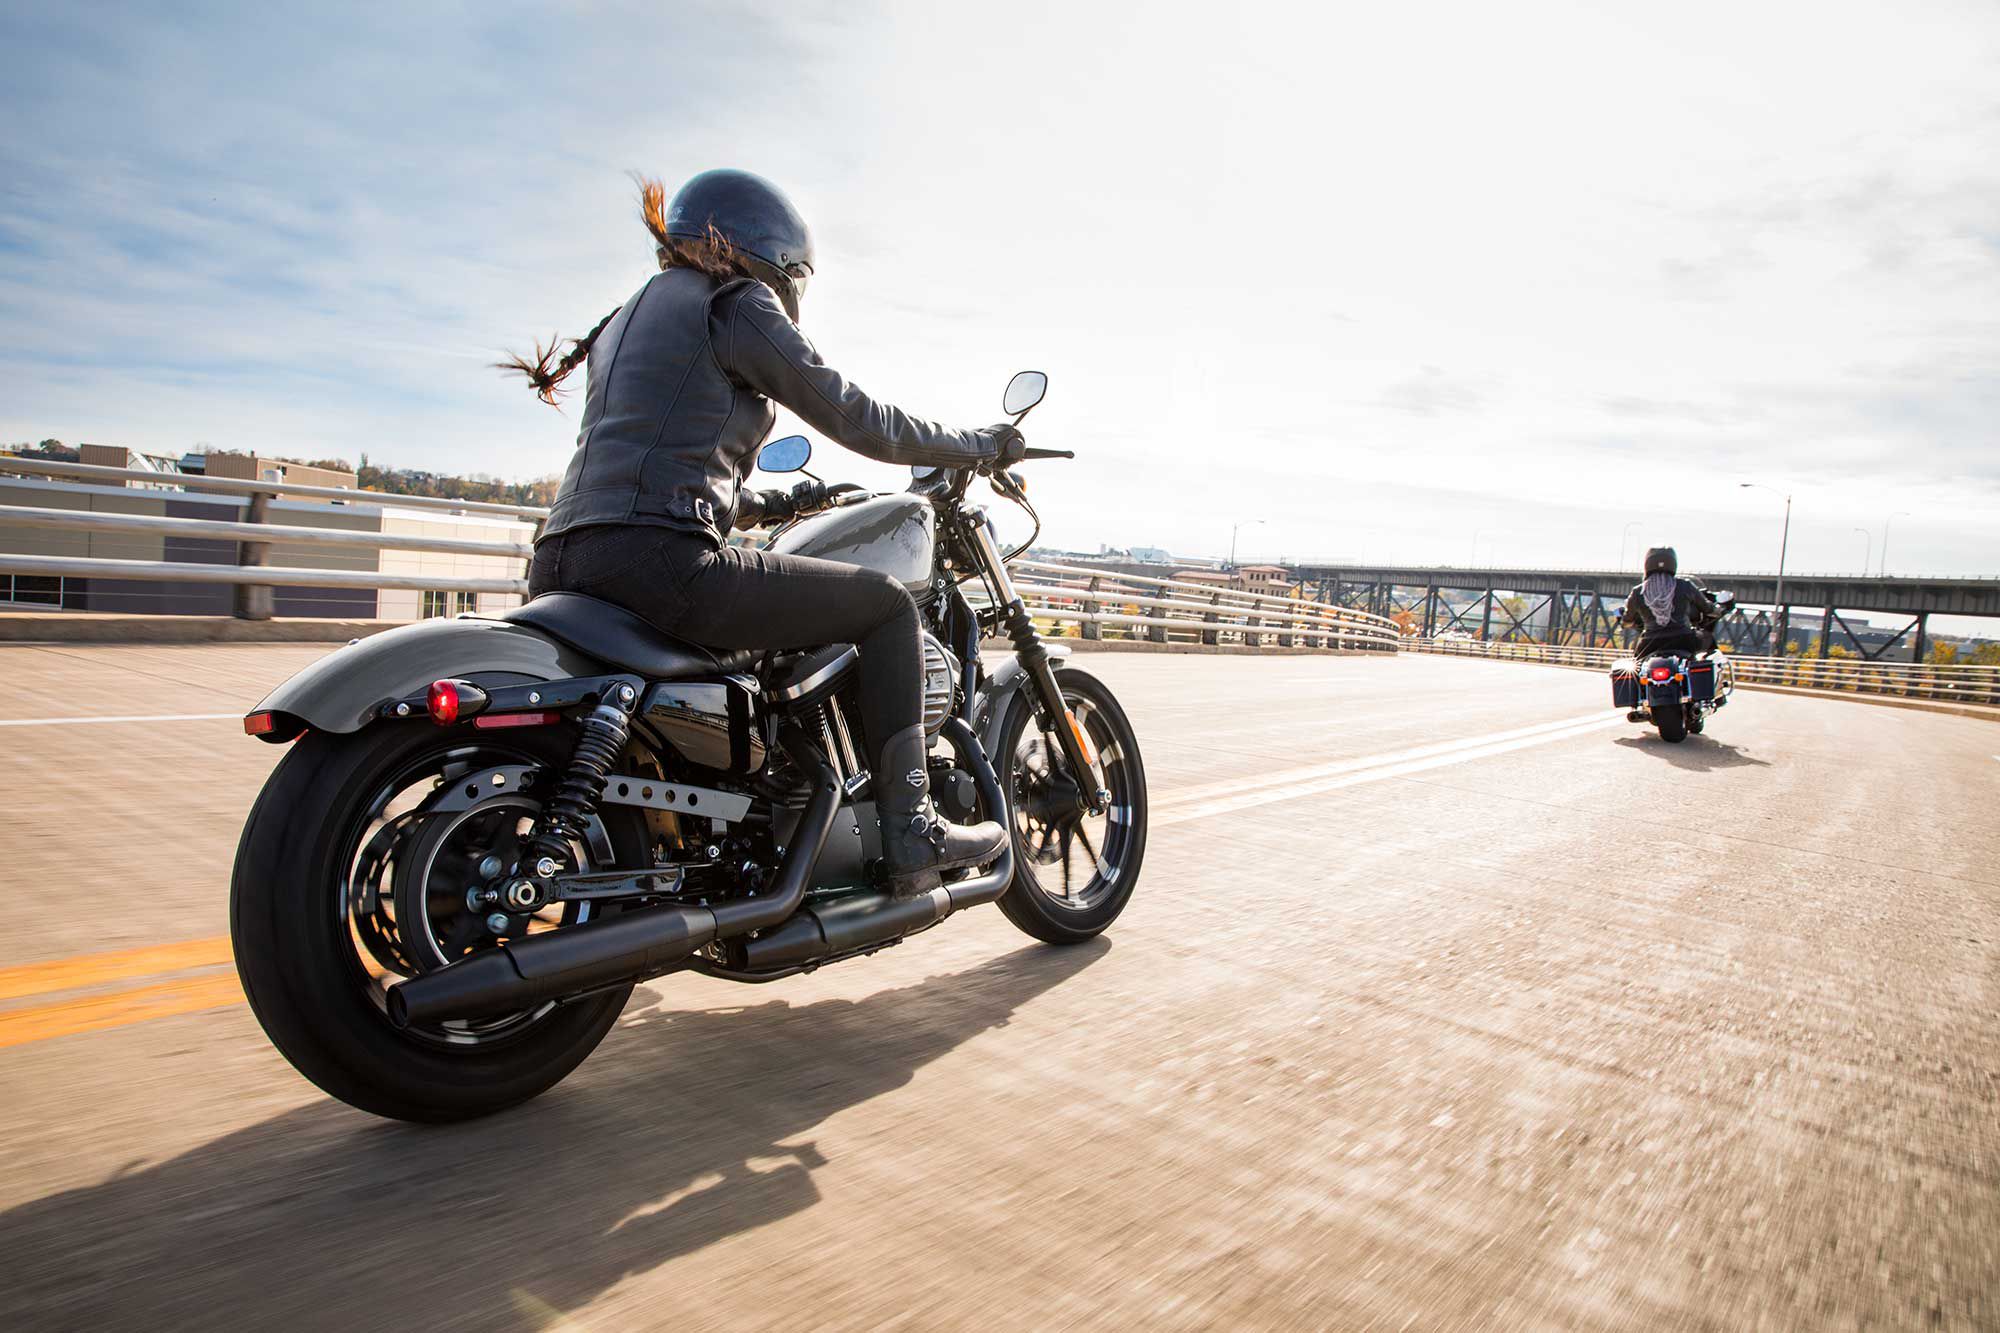 Unfortunately, 2022 marks the year the Iron 883 moved above the $10,000 mark.